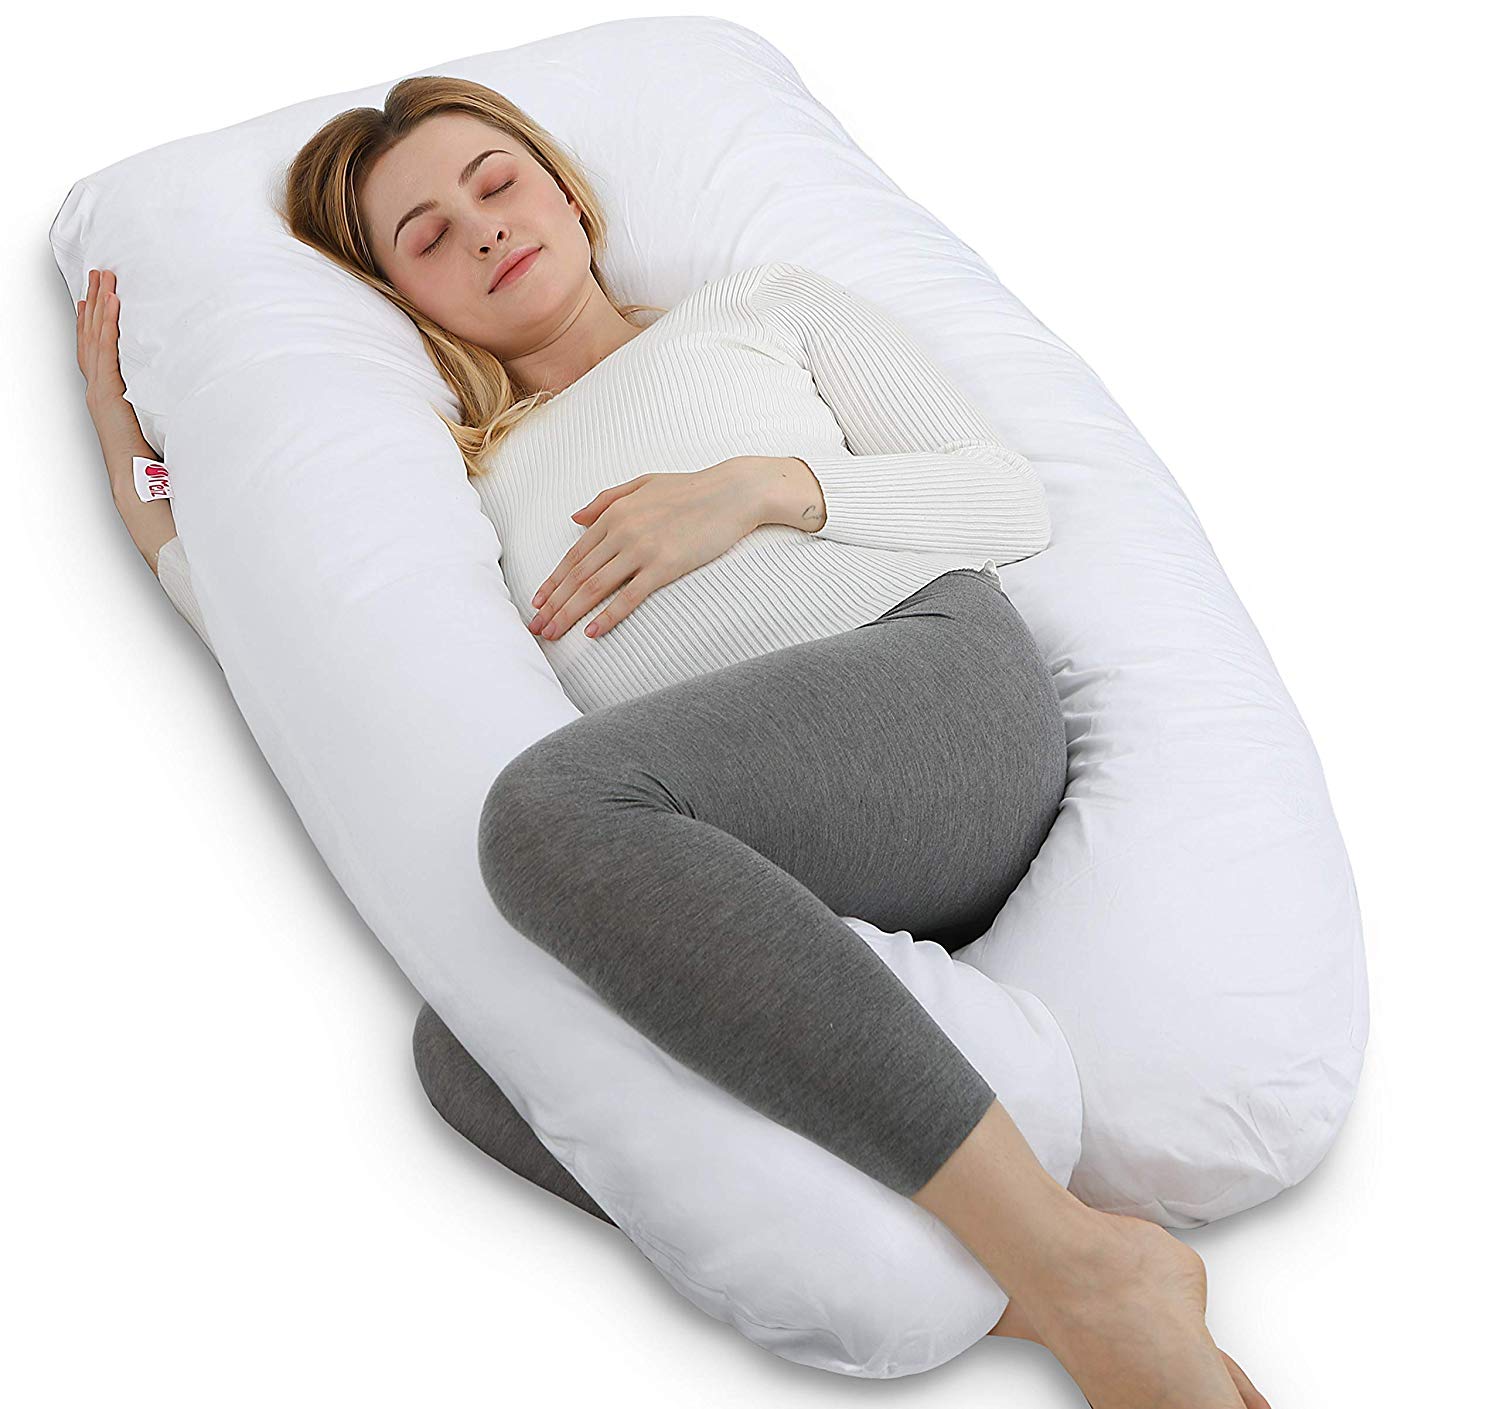 The Best Body Pillow Of 2019 – As Cosy As It Gets